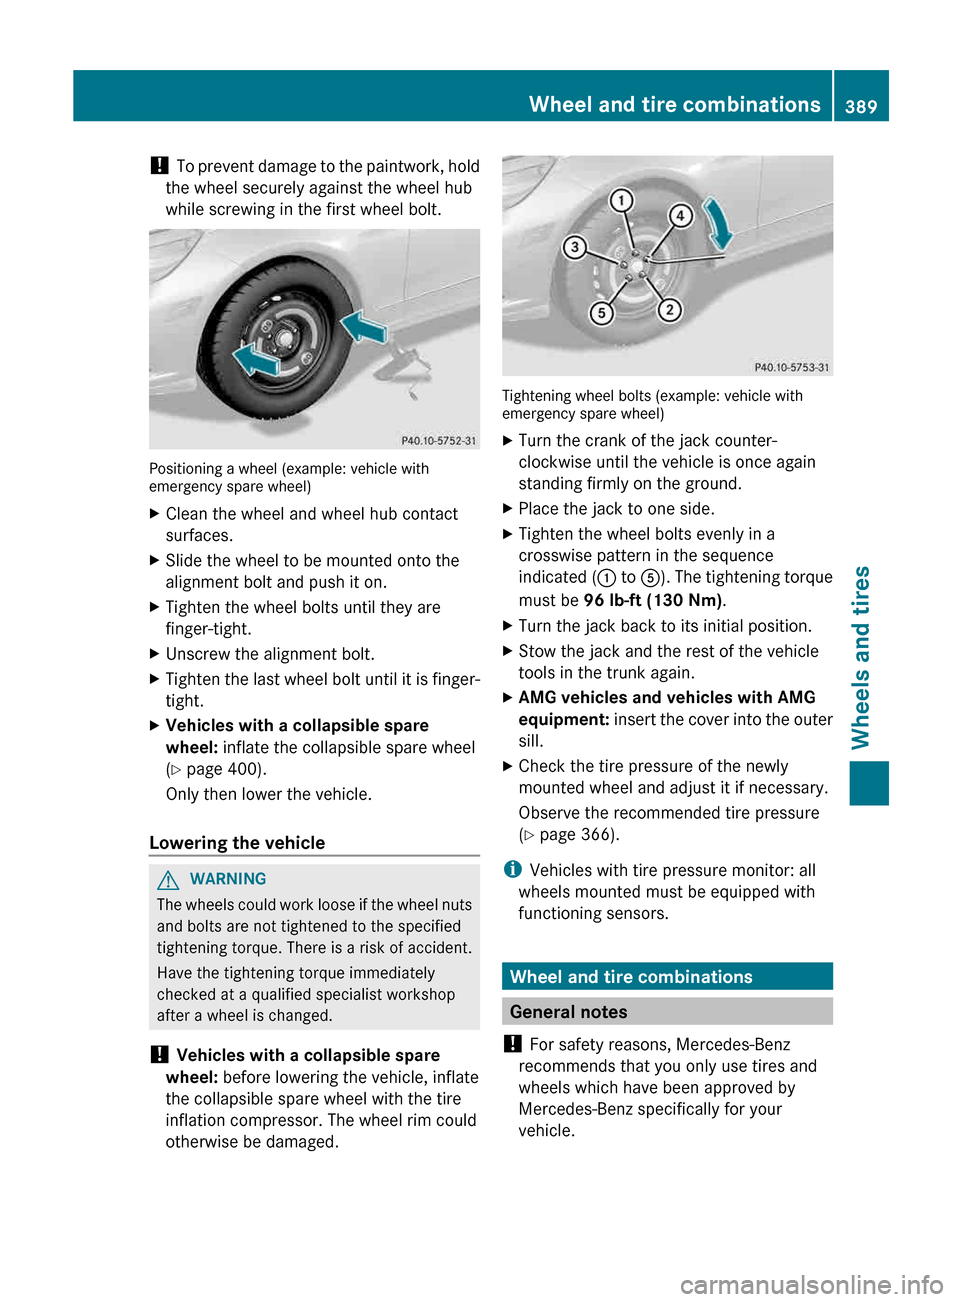 MERCEDES-BENZ E-Class WAGON 2013 W212 Service Manual ! 
To  prevent damage to the paintwork, hold
the wheel securely against the wheel hub
while screwing in the first wheel bolt. Positioning a wheel (example: vehicle with
emergency spare wheel)
X
Clean 